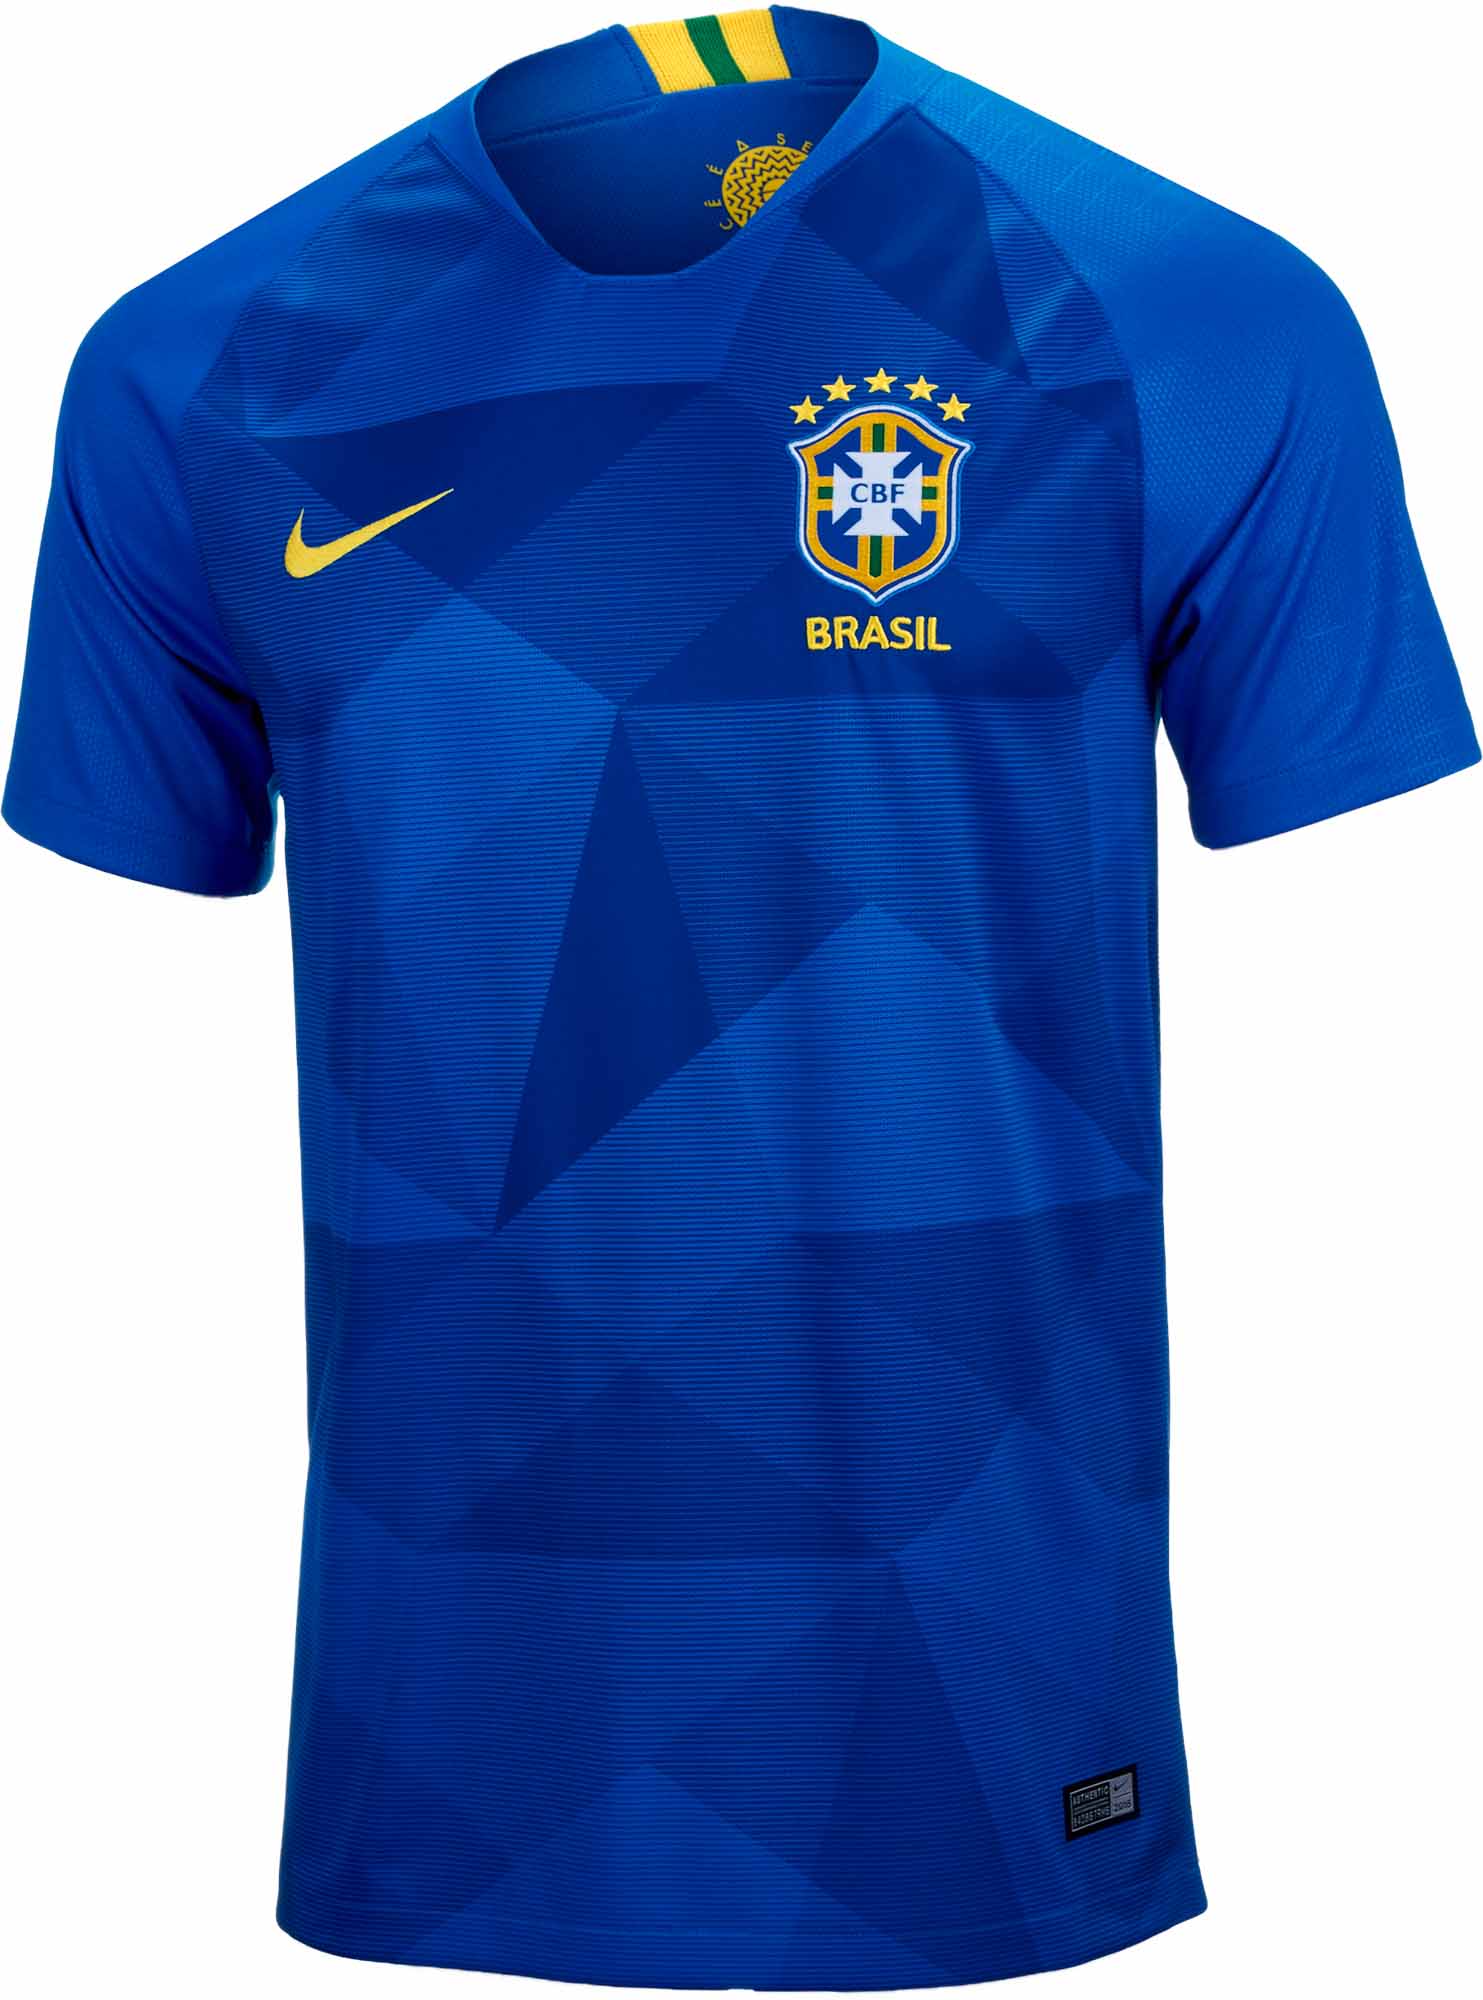 Image result for brazil world cup 2018 jersey